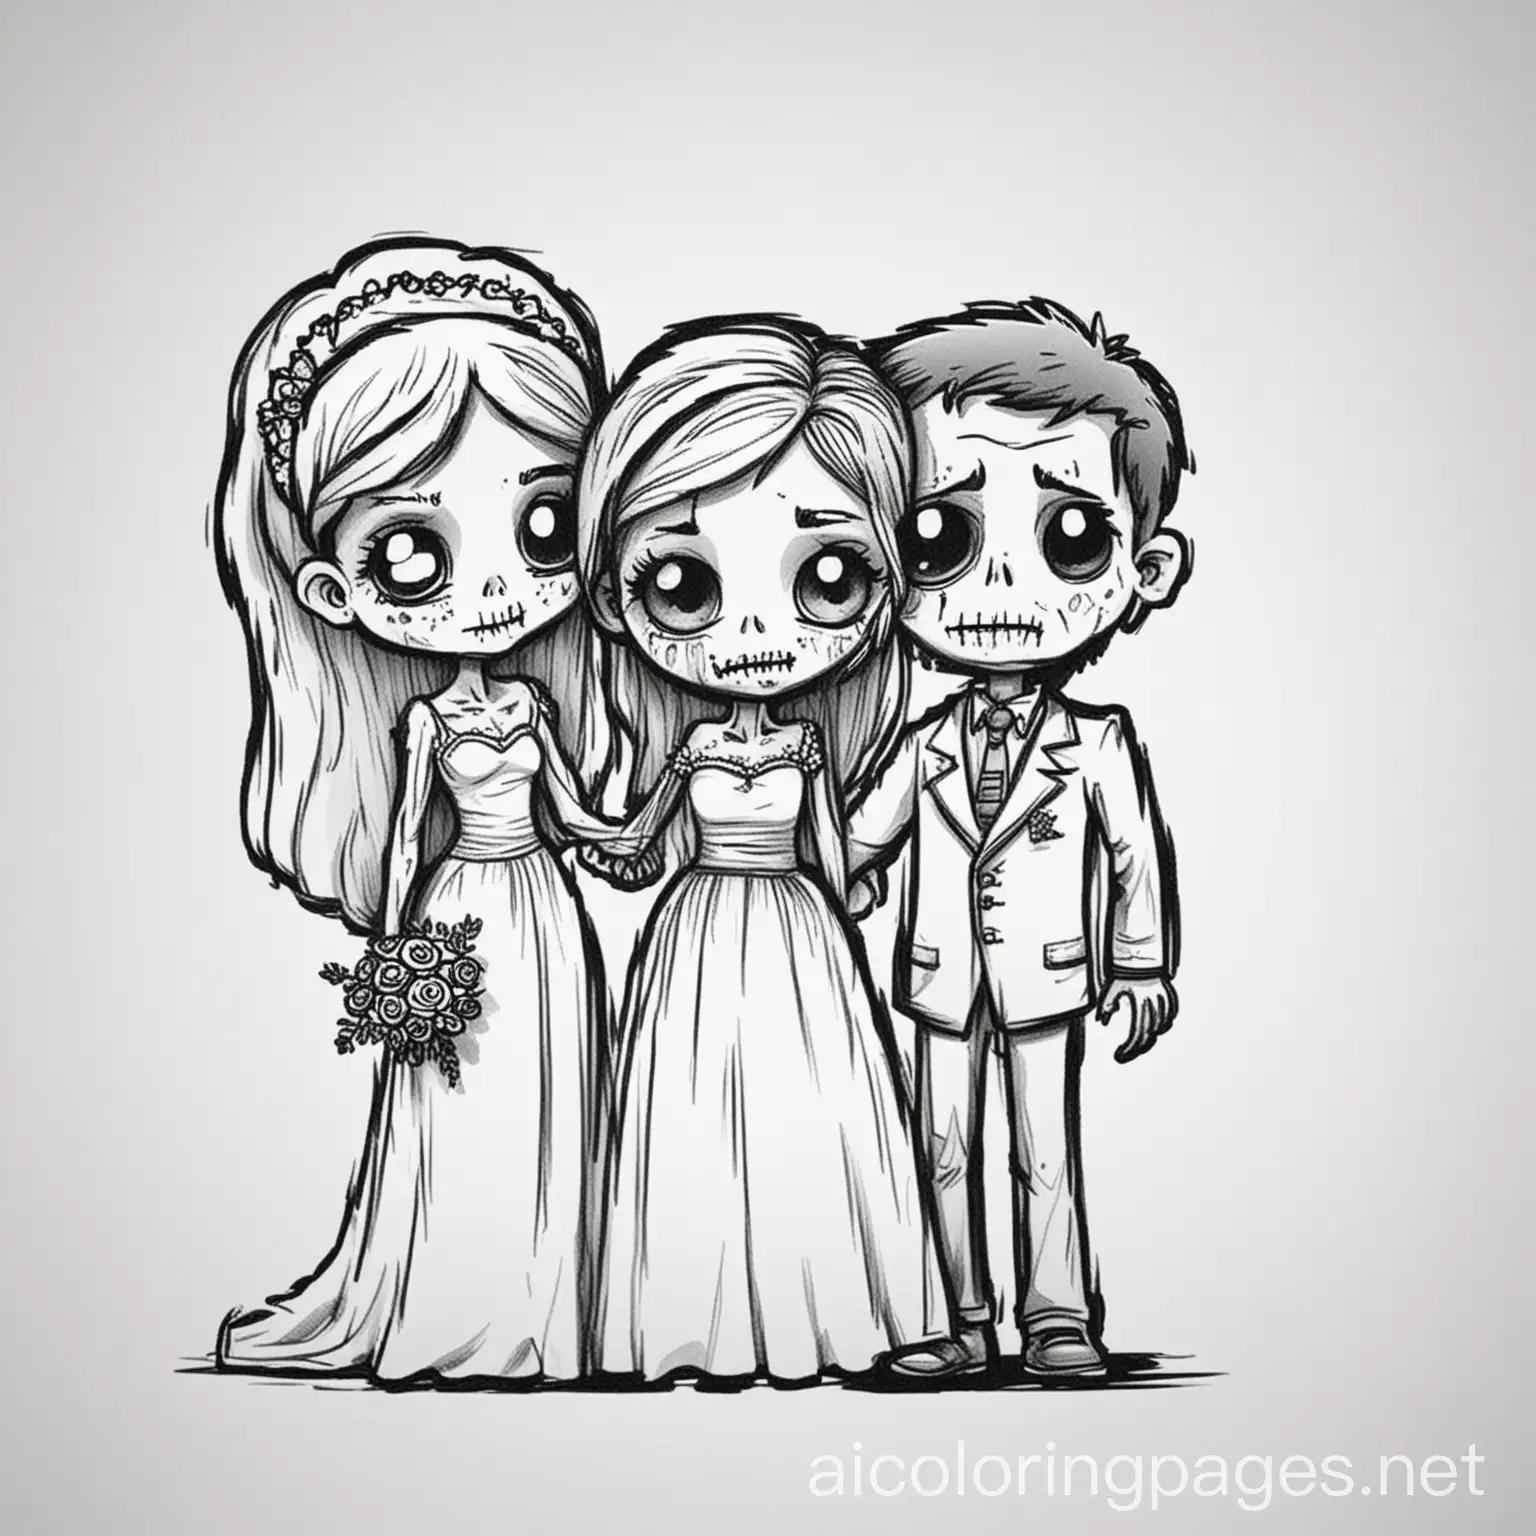 dead zombie kids couple wedding, Coloring Page, black and white, line art, white background, Simplicity, Ample White Space. The background of the coloring page is plain white to make it easy for young children to color within the lines. The outlines of all the subjects are easy to distinguish, making it simple for kids to color without too much difficulty